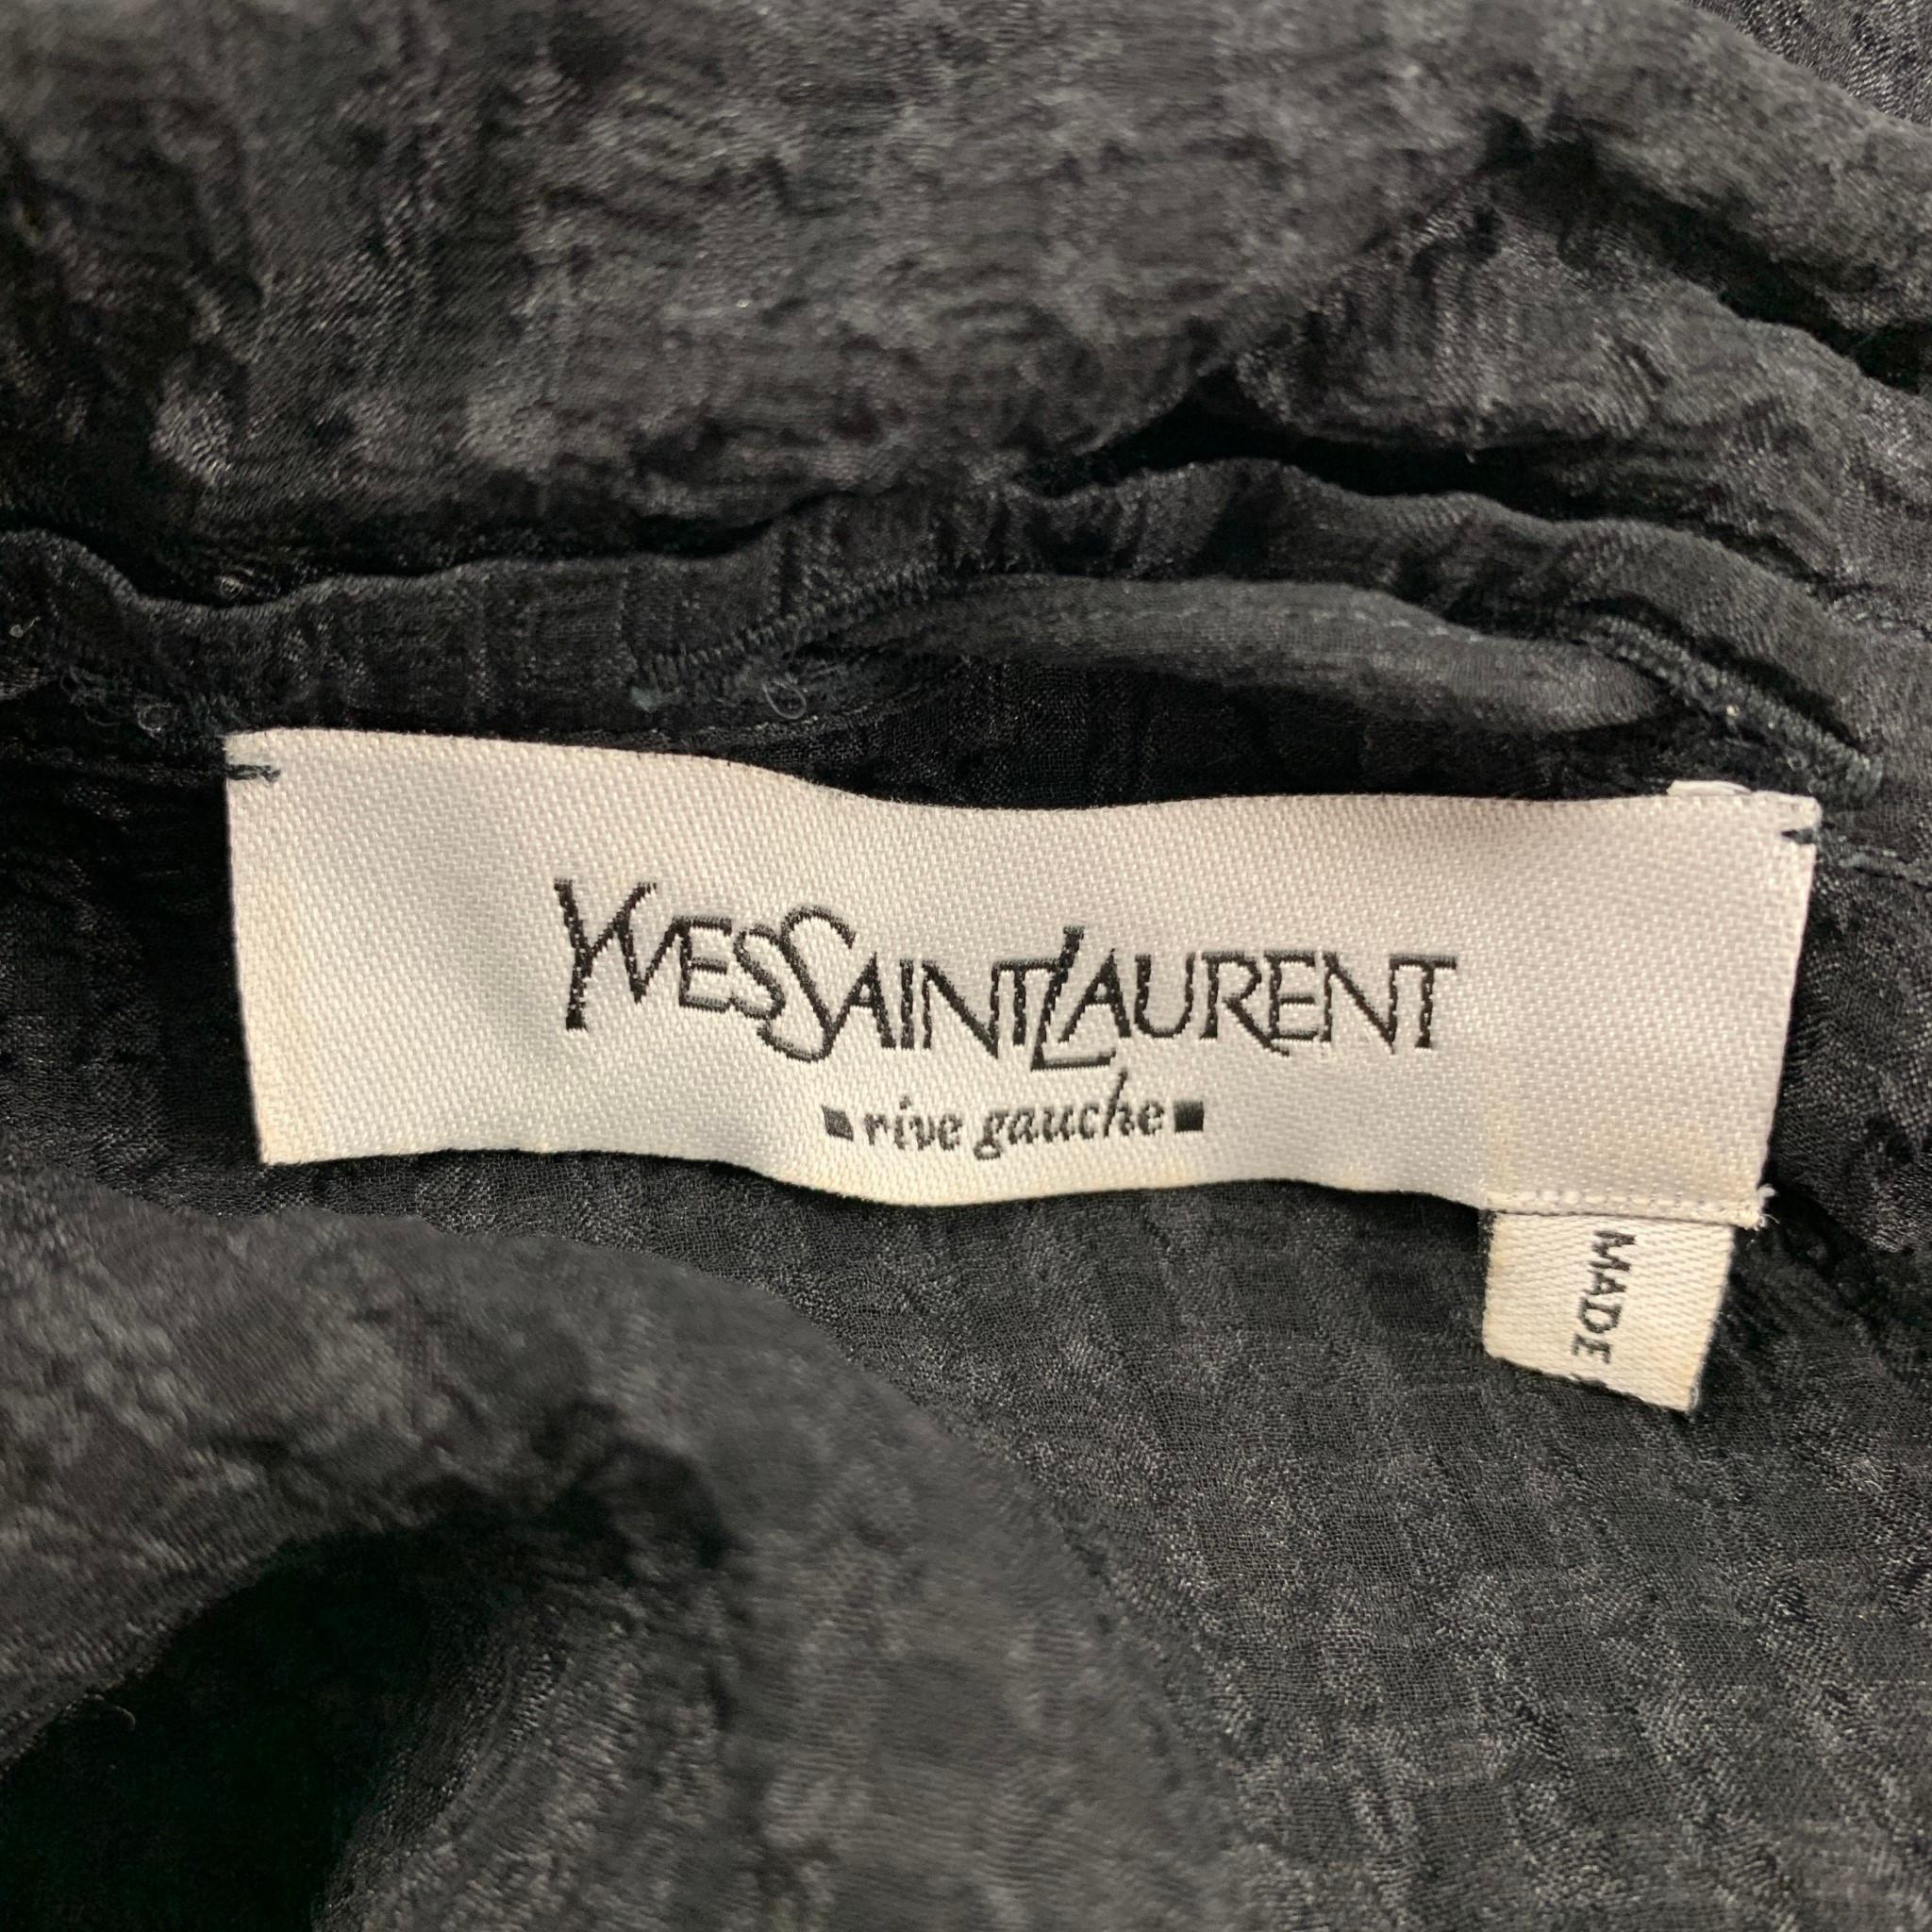 YVES SAINT LAURENT blouse comes in a black see through silk featuring a collar strap detail, patch pockets, dolman sleeves, and a buttoned closure. Made in Italy.

Very Good Pre-Owned Condition. Missing size tag.

Measurements:

Shoulder: 17